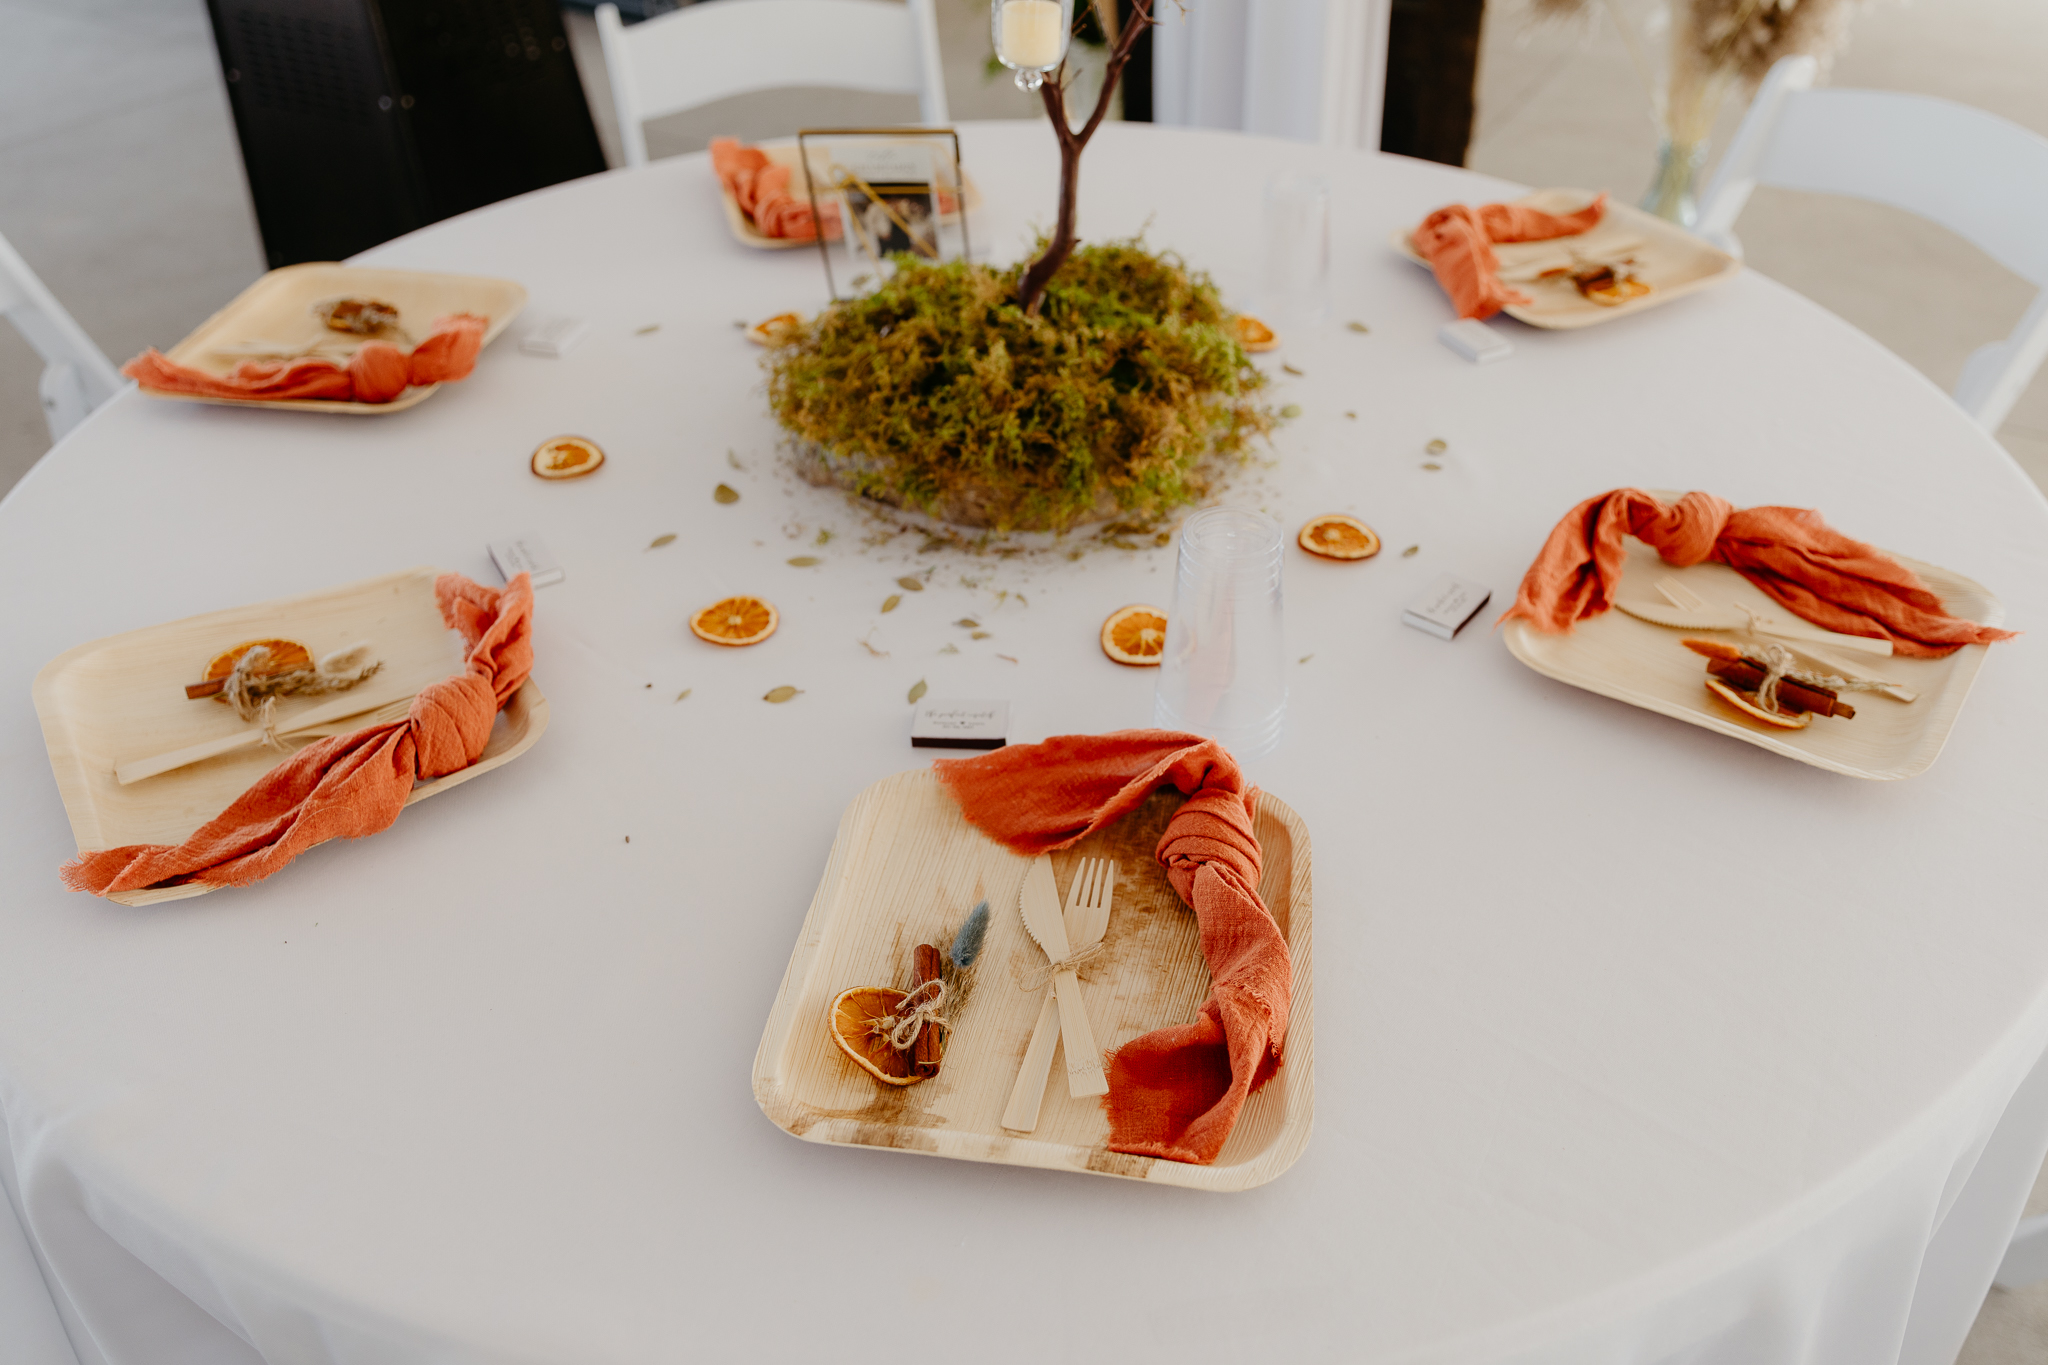 Plates and napkin wedding details, with a copper napkin, dried oranges, and wooden plates